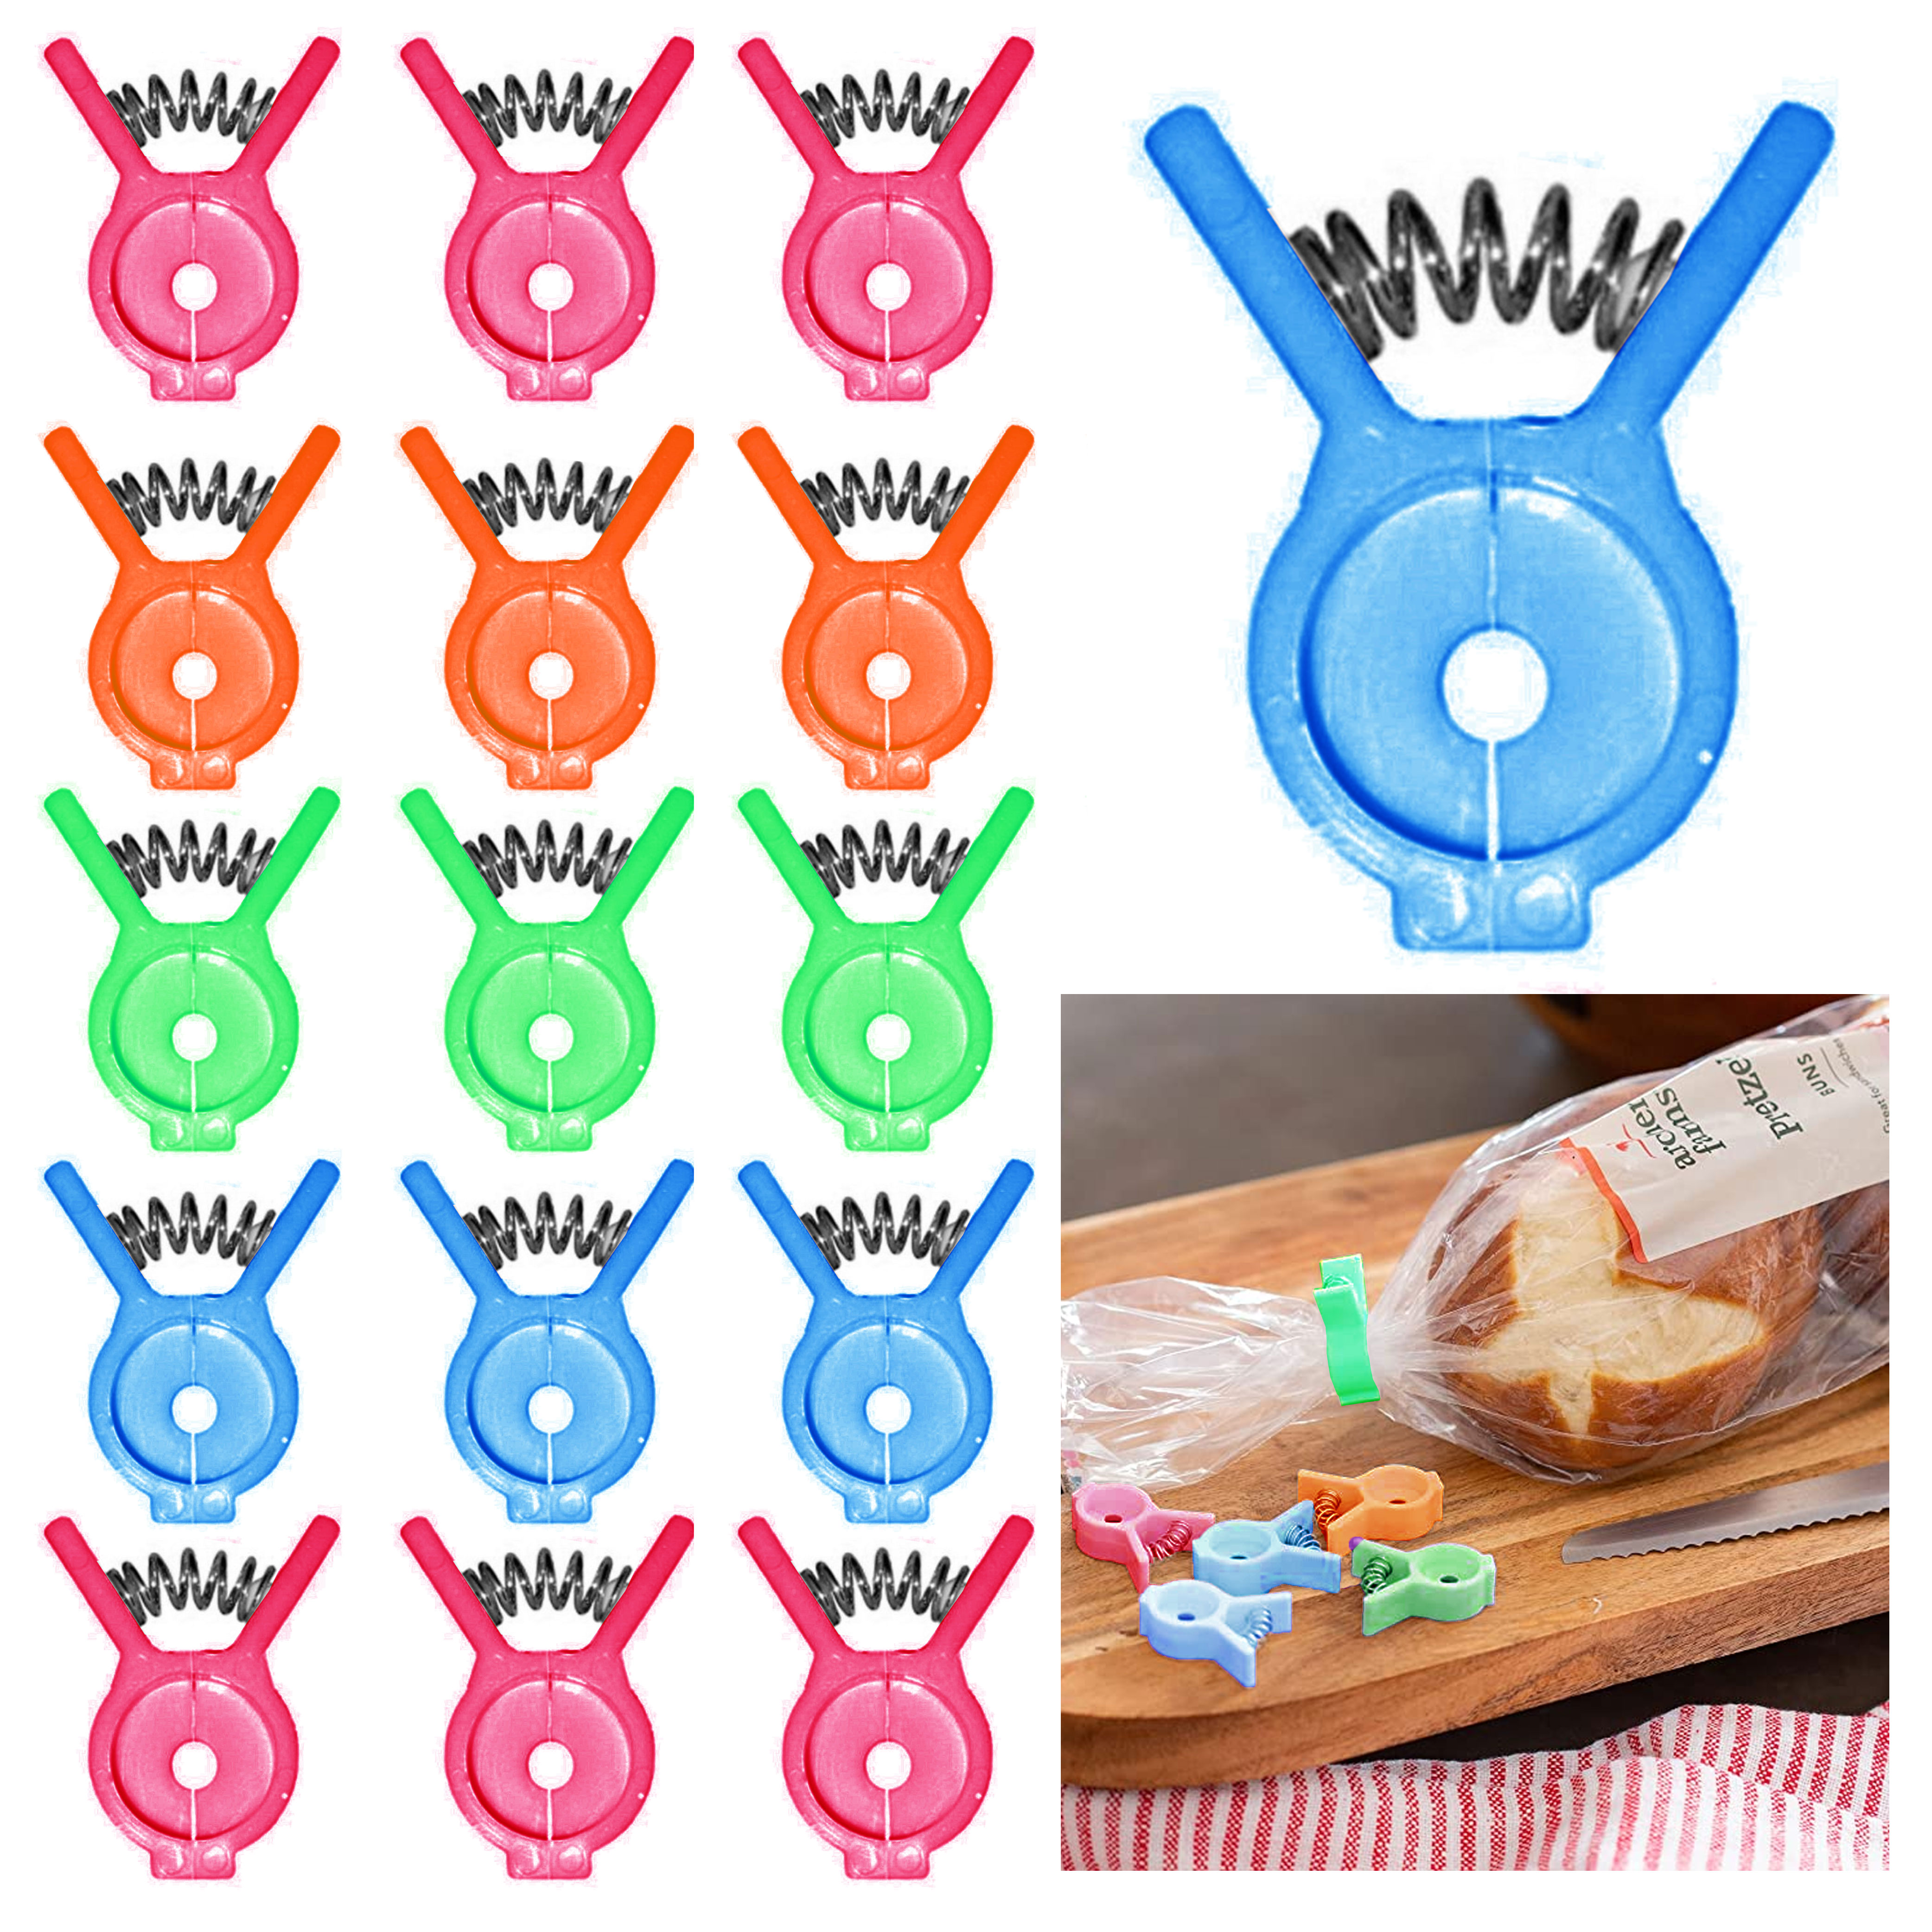 10 Kitchen Chip Snack Food Storage Sealing Bag Clips Clamps Multi